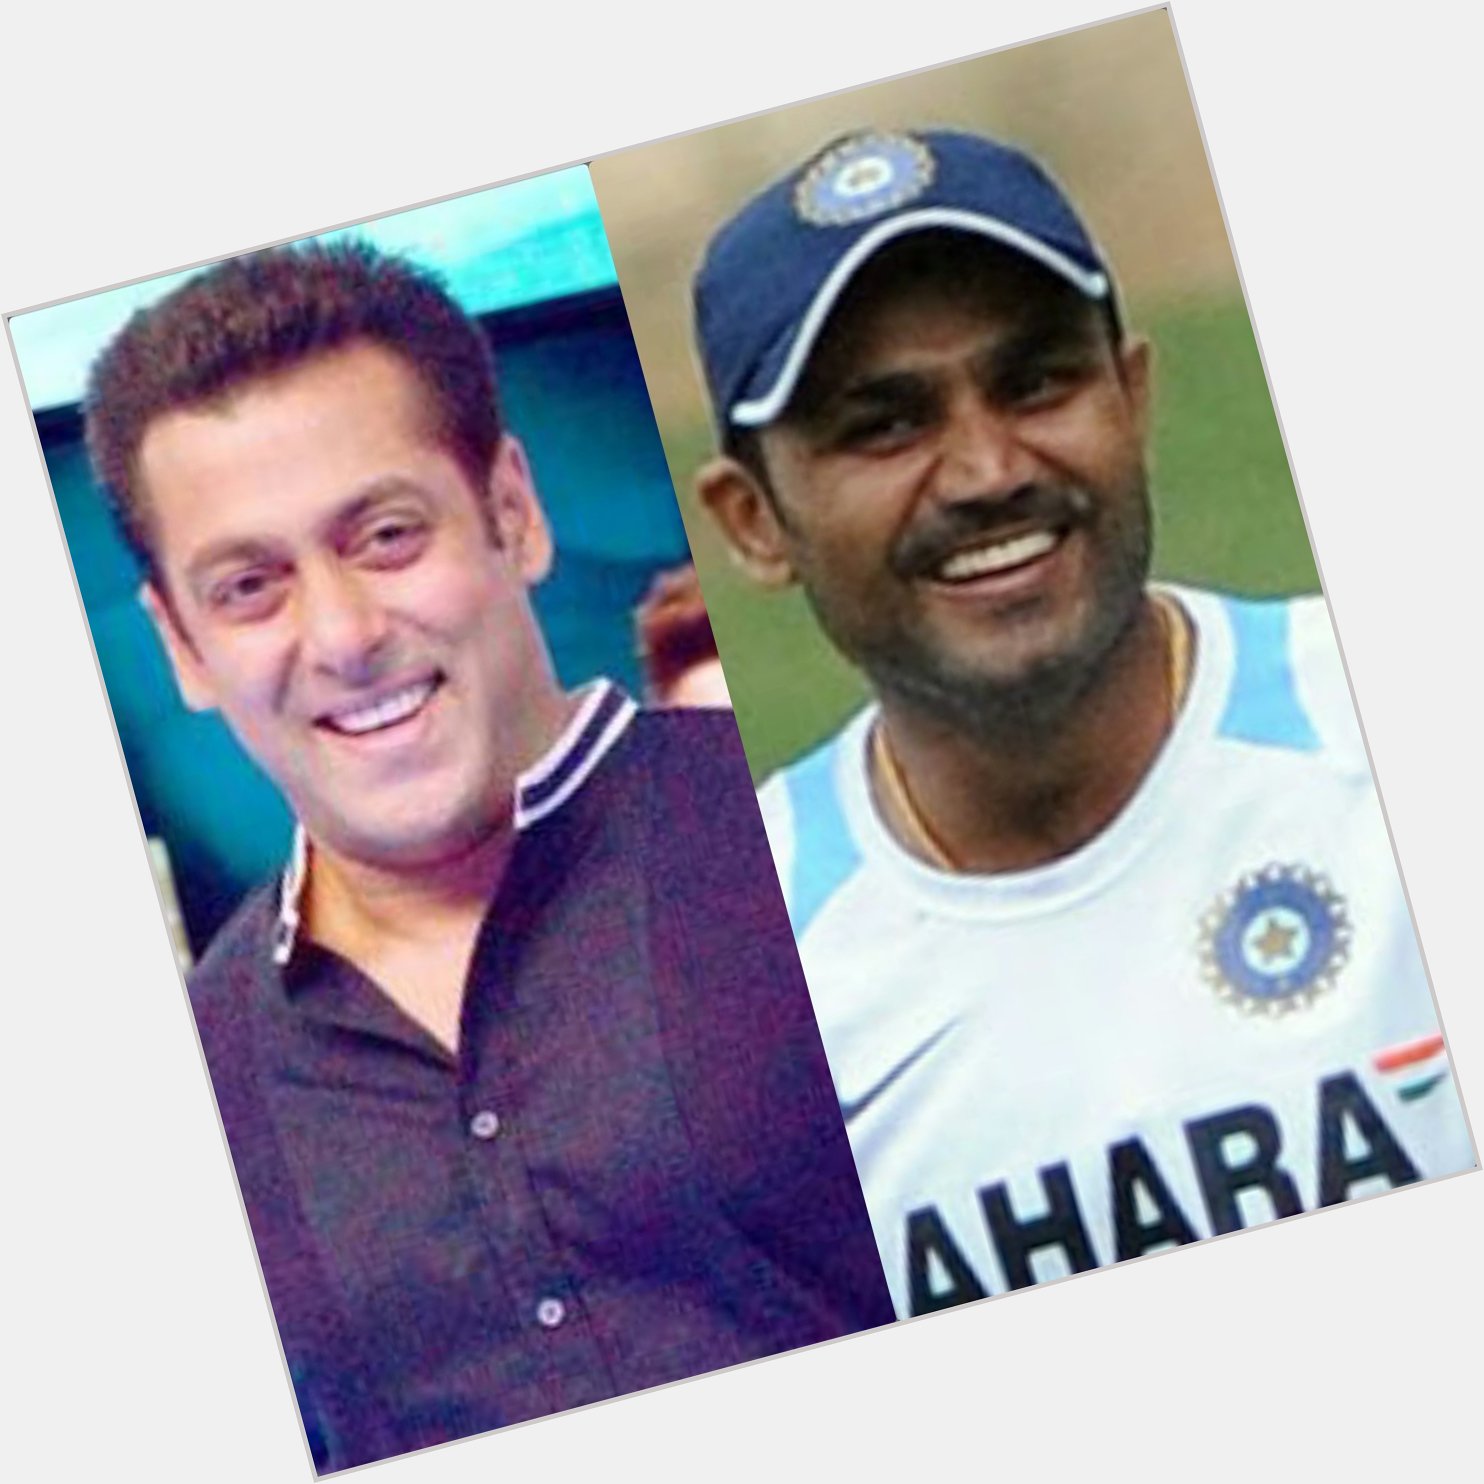 Happy birthday to the Bhaijaan of bollywood SALMAN KHAN on behalf of Virender Sehwag & all his fans across the globe 